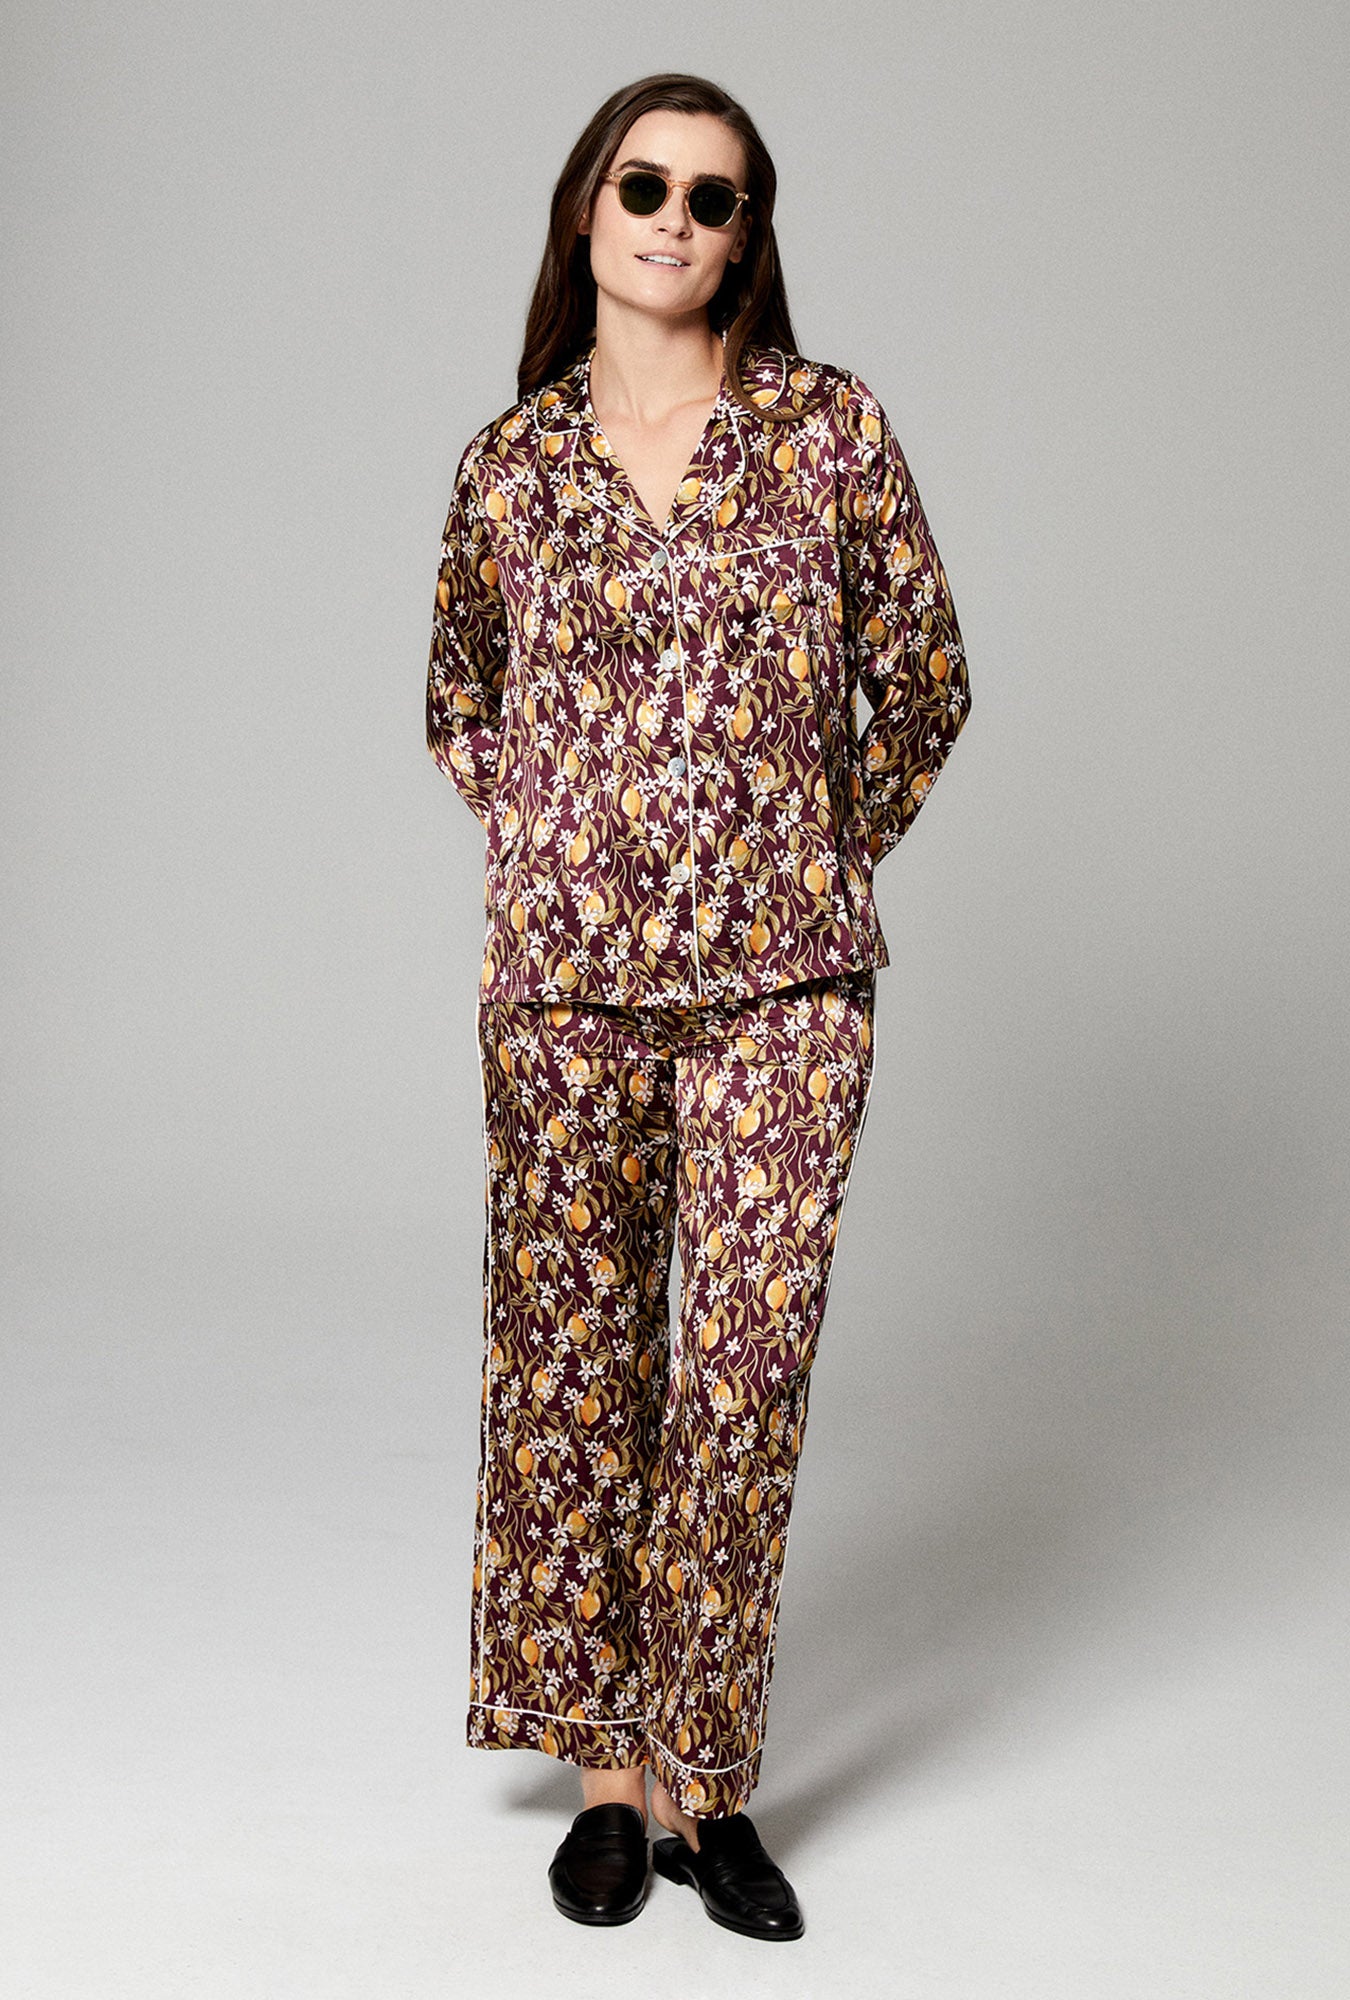 A lady wearing burgundy long sleeve pj set with floral print